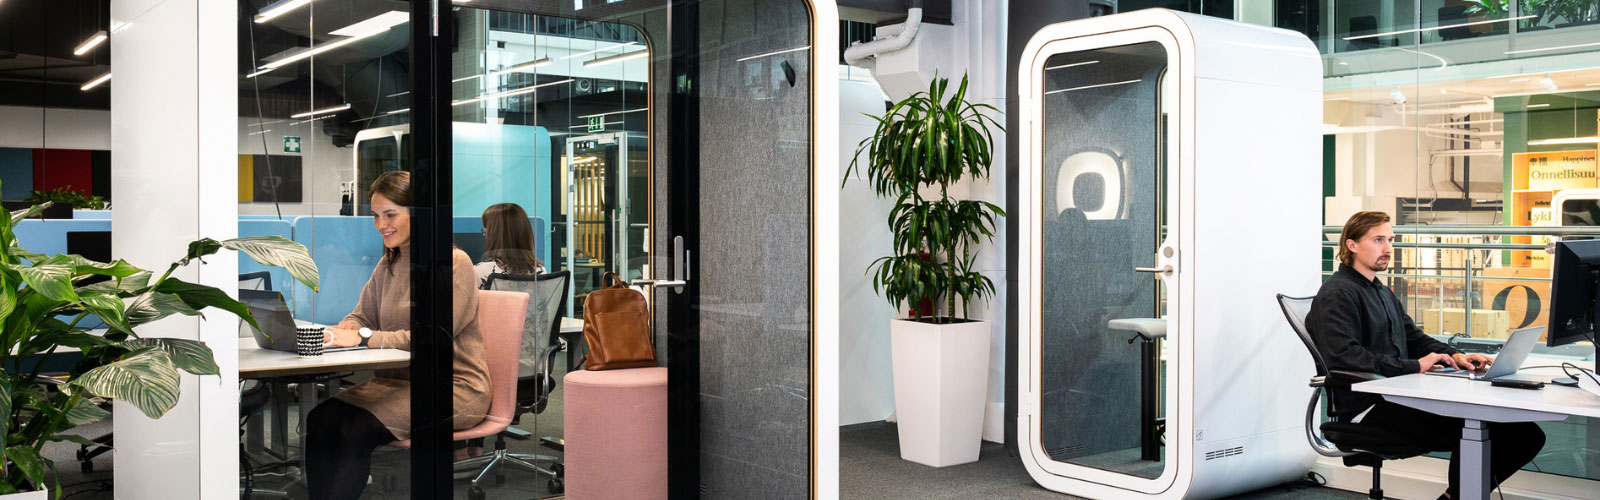 Privacy pods in modern office for concentration